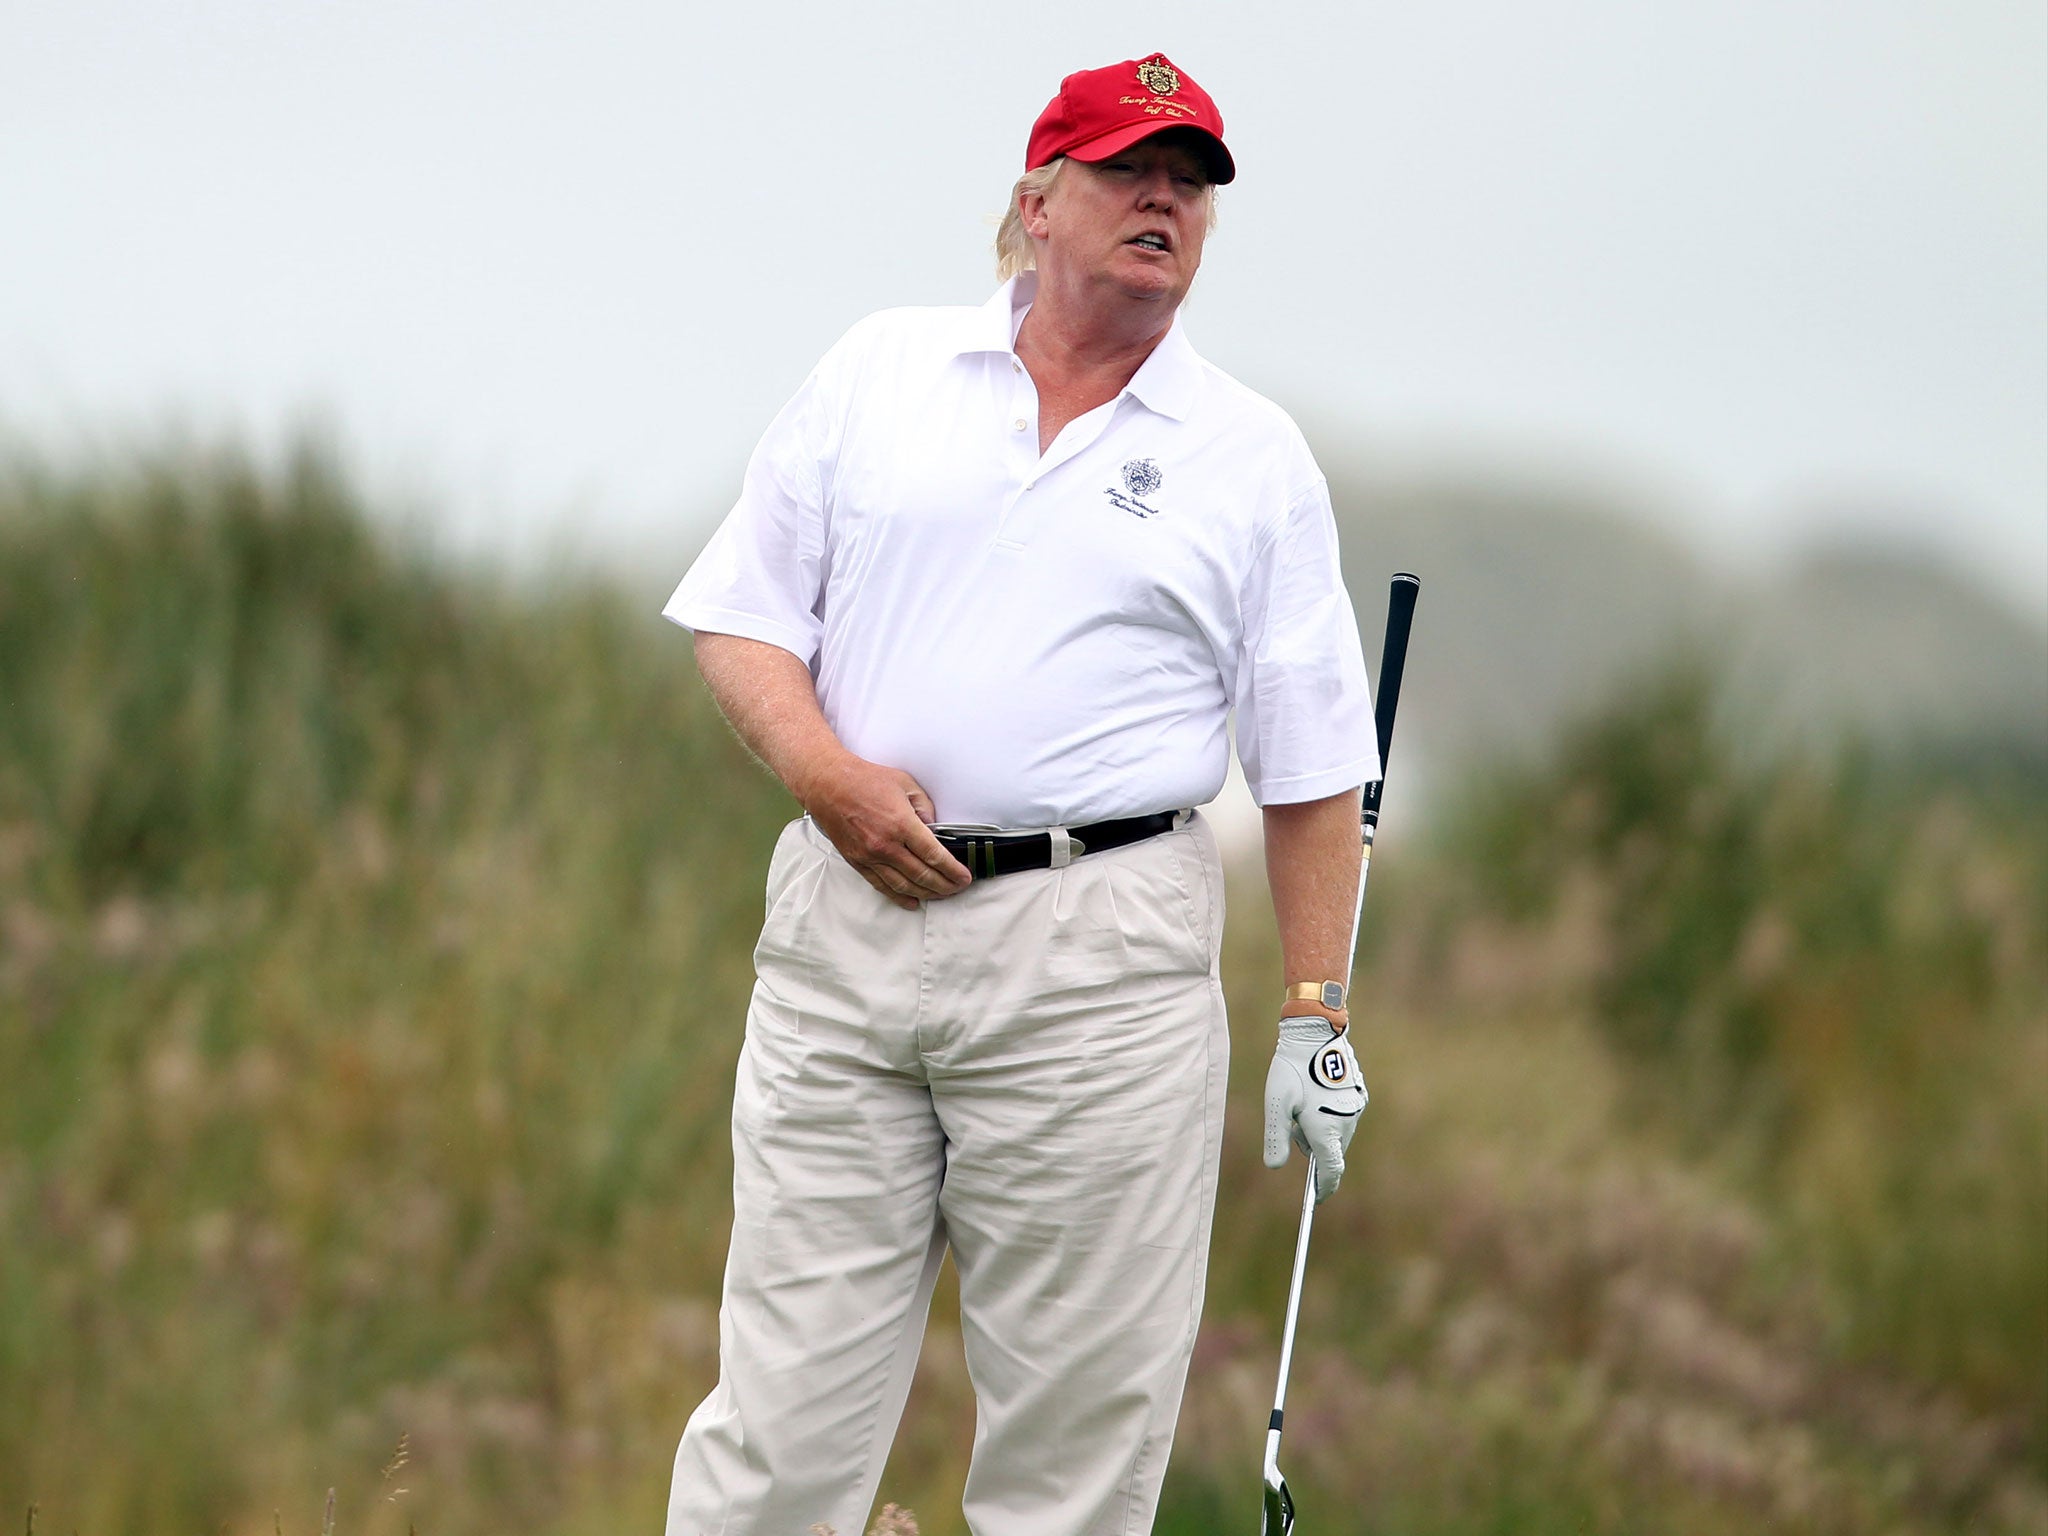 Mr Trump has hit the green with the likes of Japanese Prime Minister Shinzo Abe and champion professionals Rory McIlroy and Tiger Woods since taking office